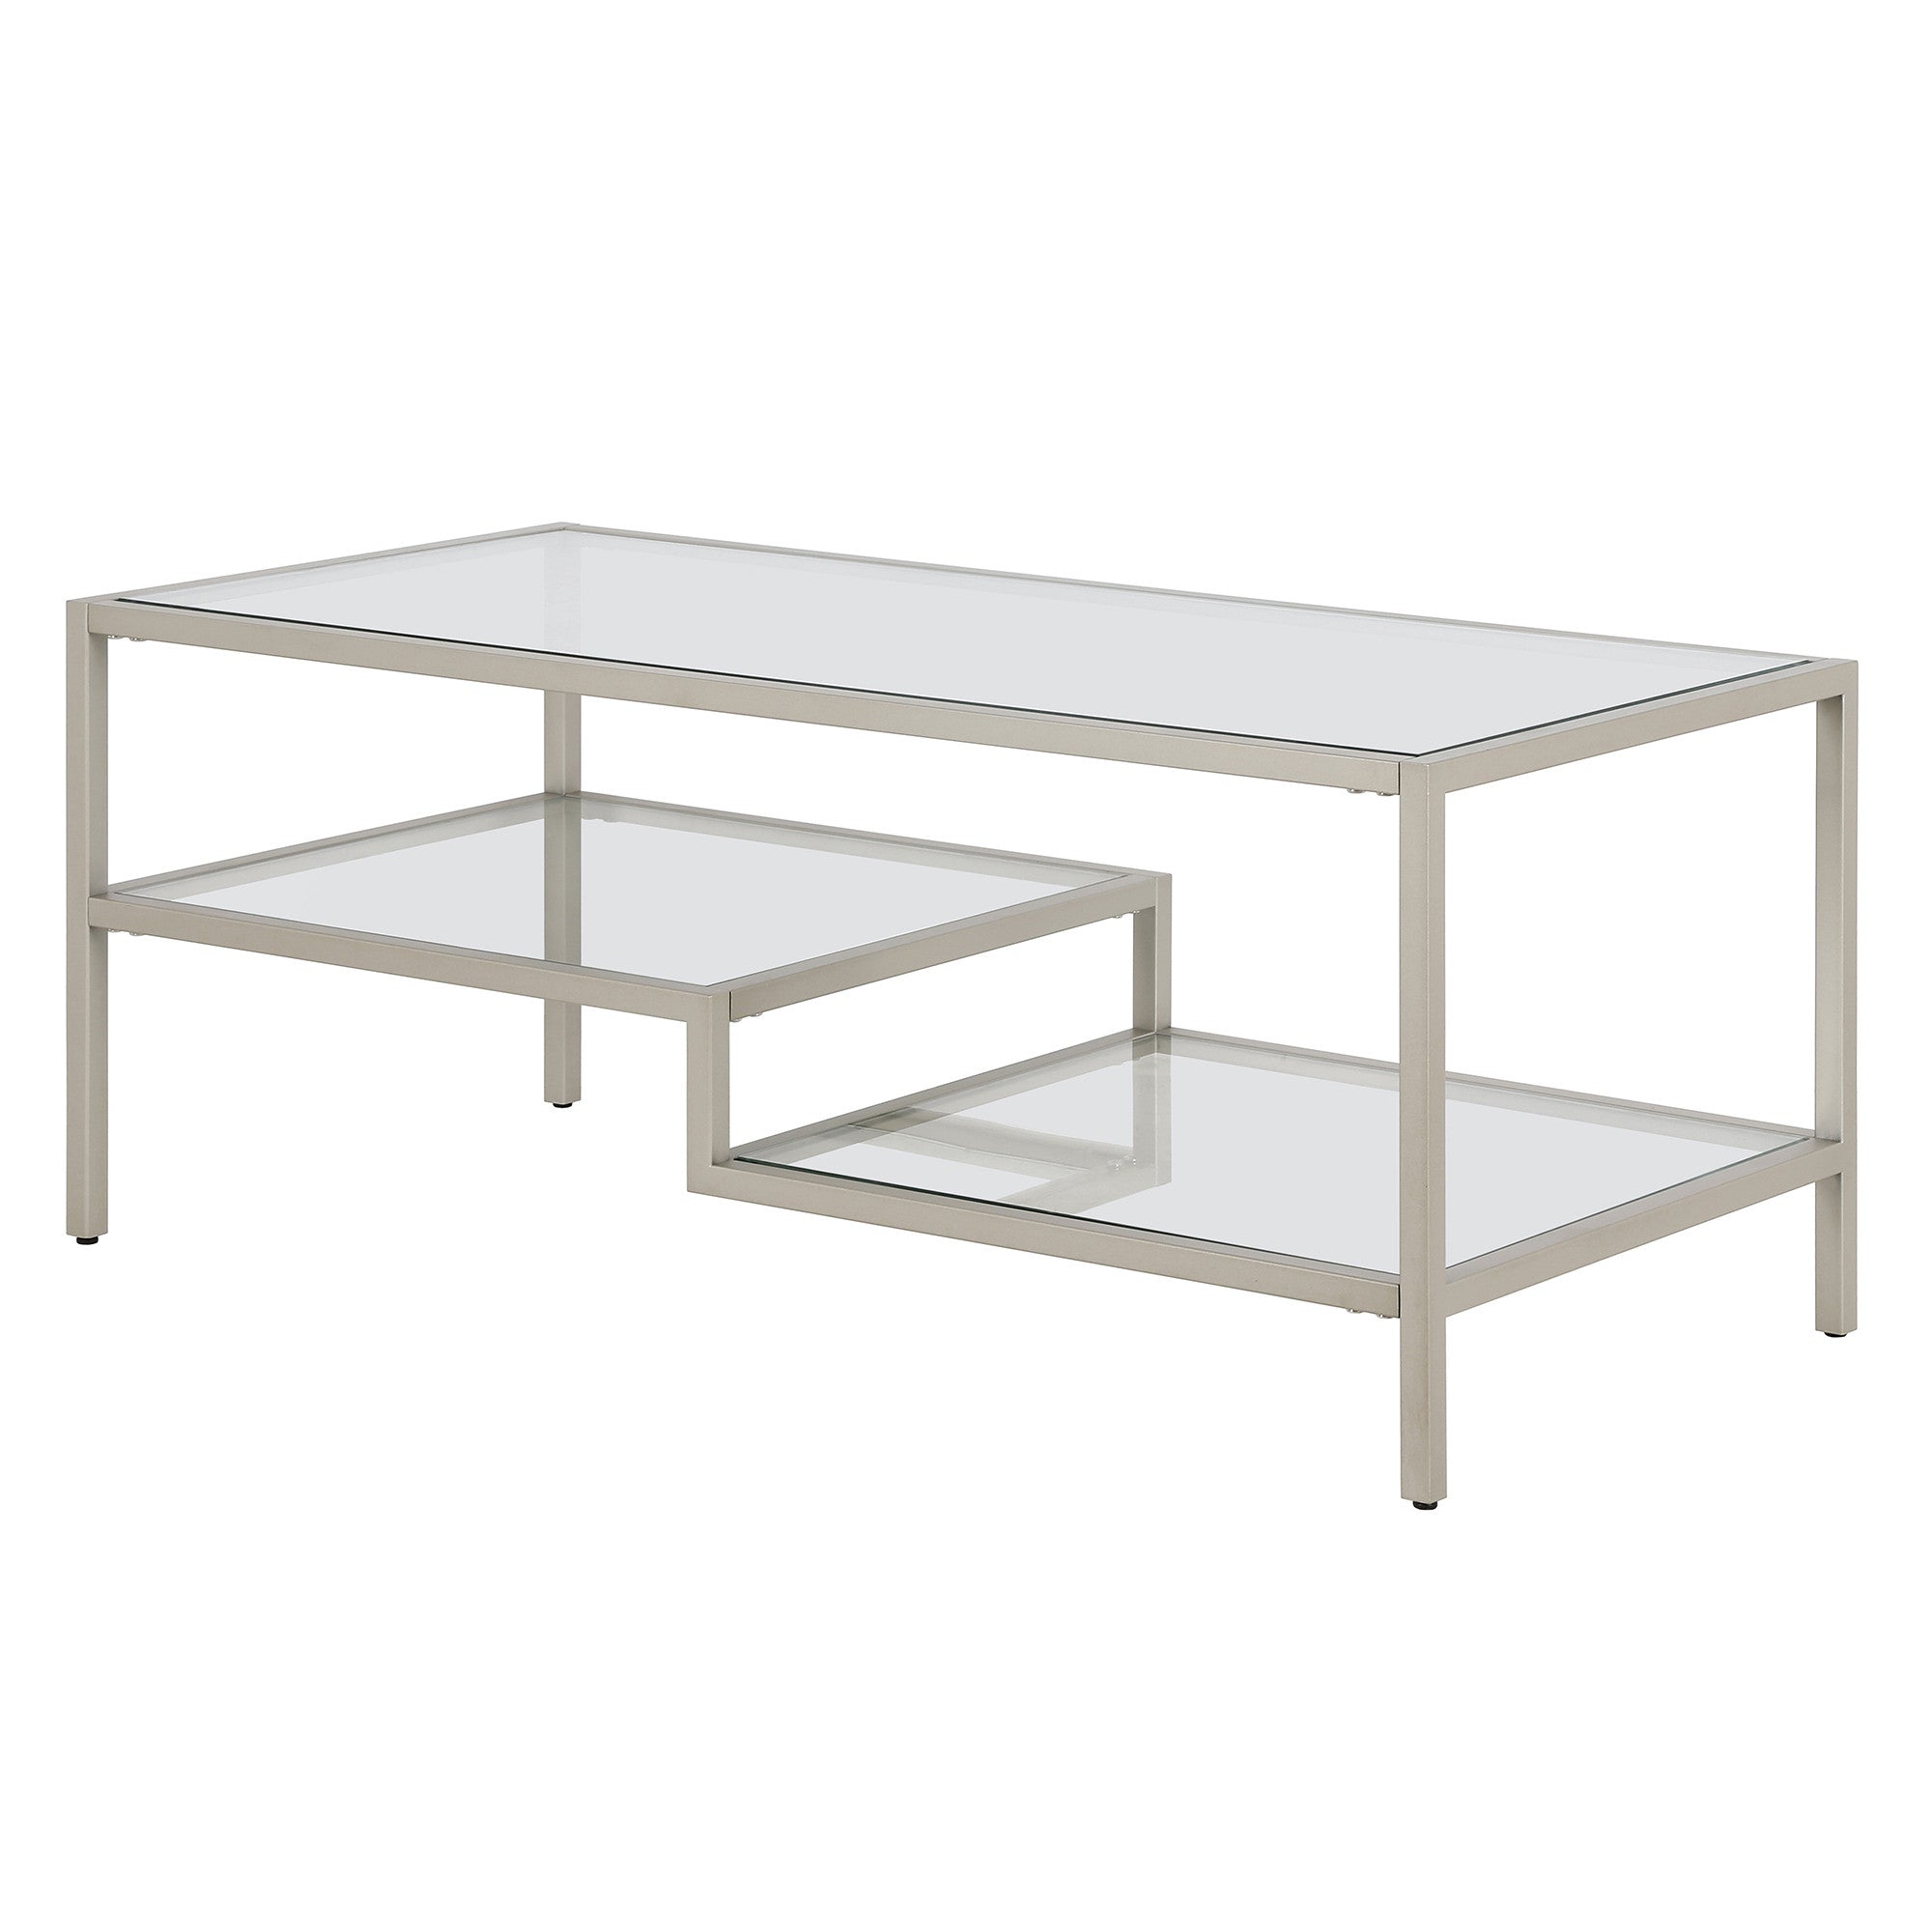 45" Silver Glass And Steel Coffee Table With Two Shelves